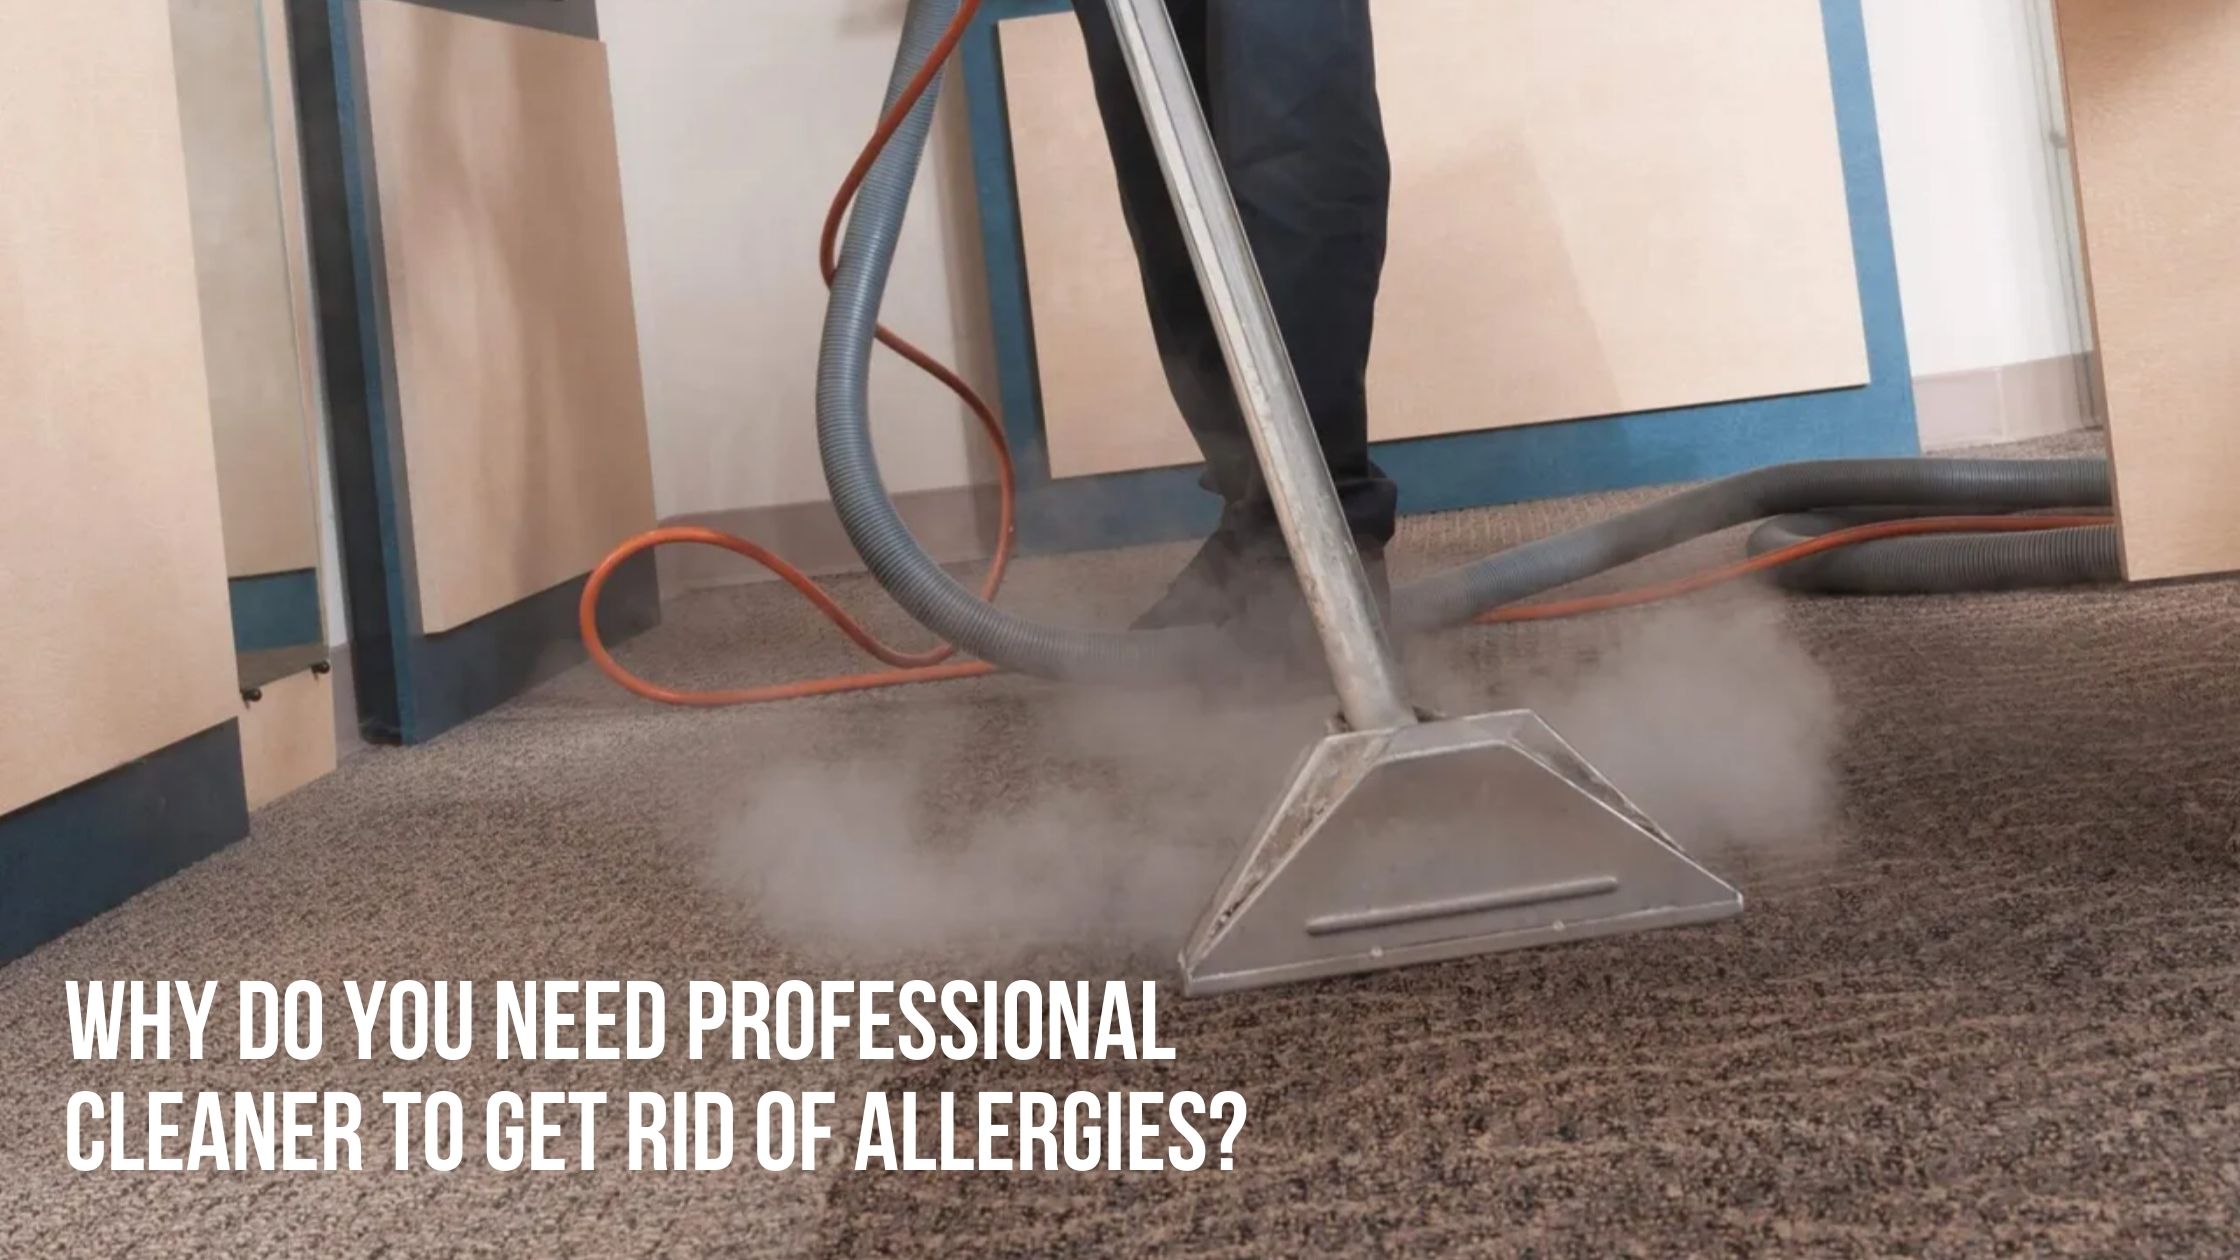 Why Do You Need Professional Cleaner to Get Rid of Allergies (1)